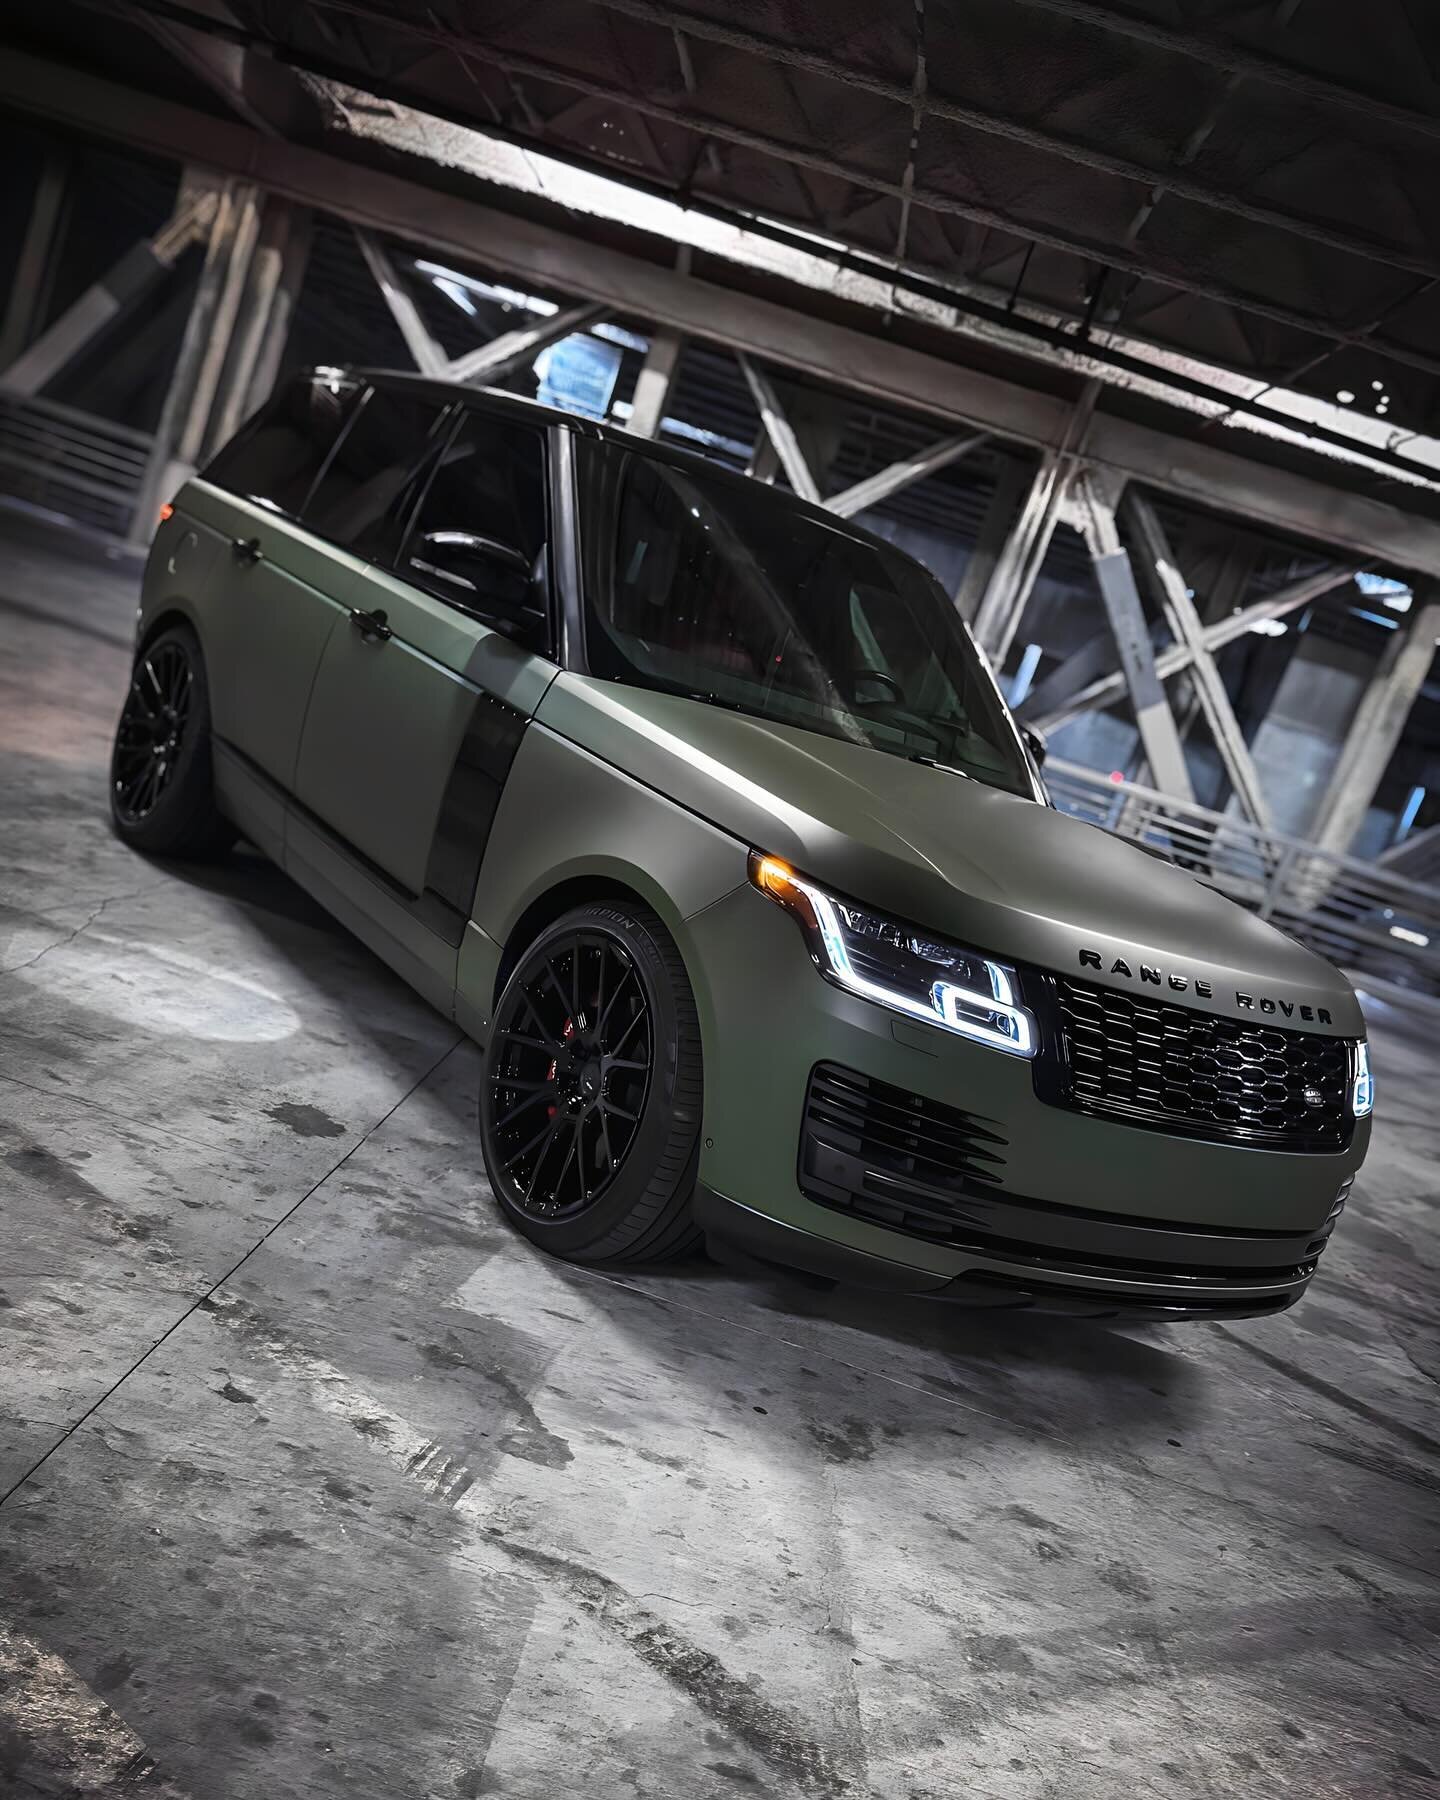 Range Rover wrapped in 3M Matte Military Green w/ Gloss Black chrome Delete, Powder Coated Wheels &amp; Gloss Red Calipers. 

#mobileservice #mobilewraps #thewrapdistrict #thewrapdistrictla #vinylwrap #wrapped #paintisdead #southbay #sanfernandovalle